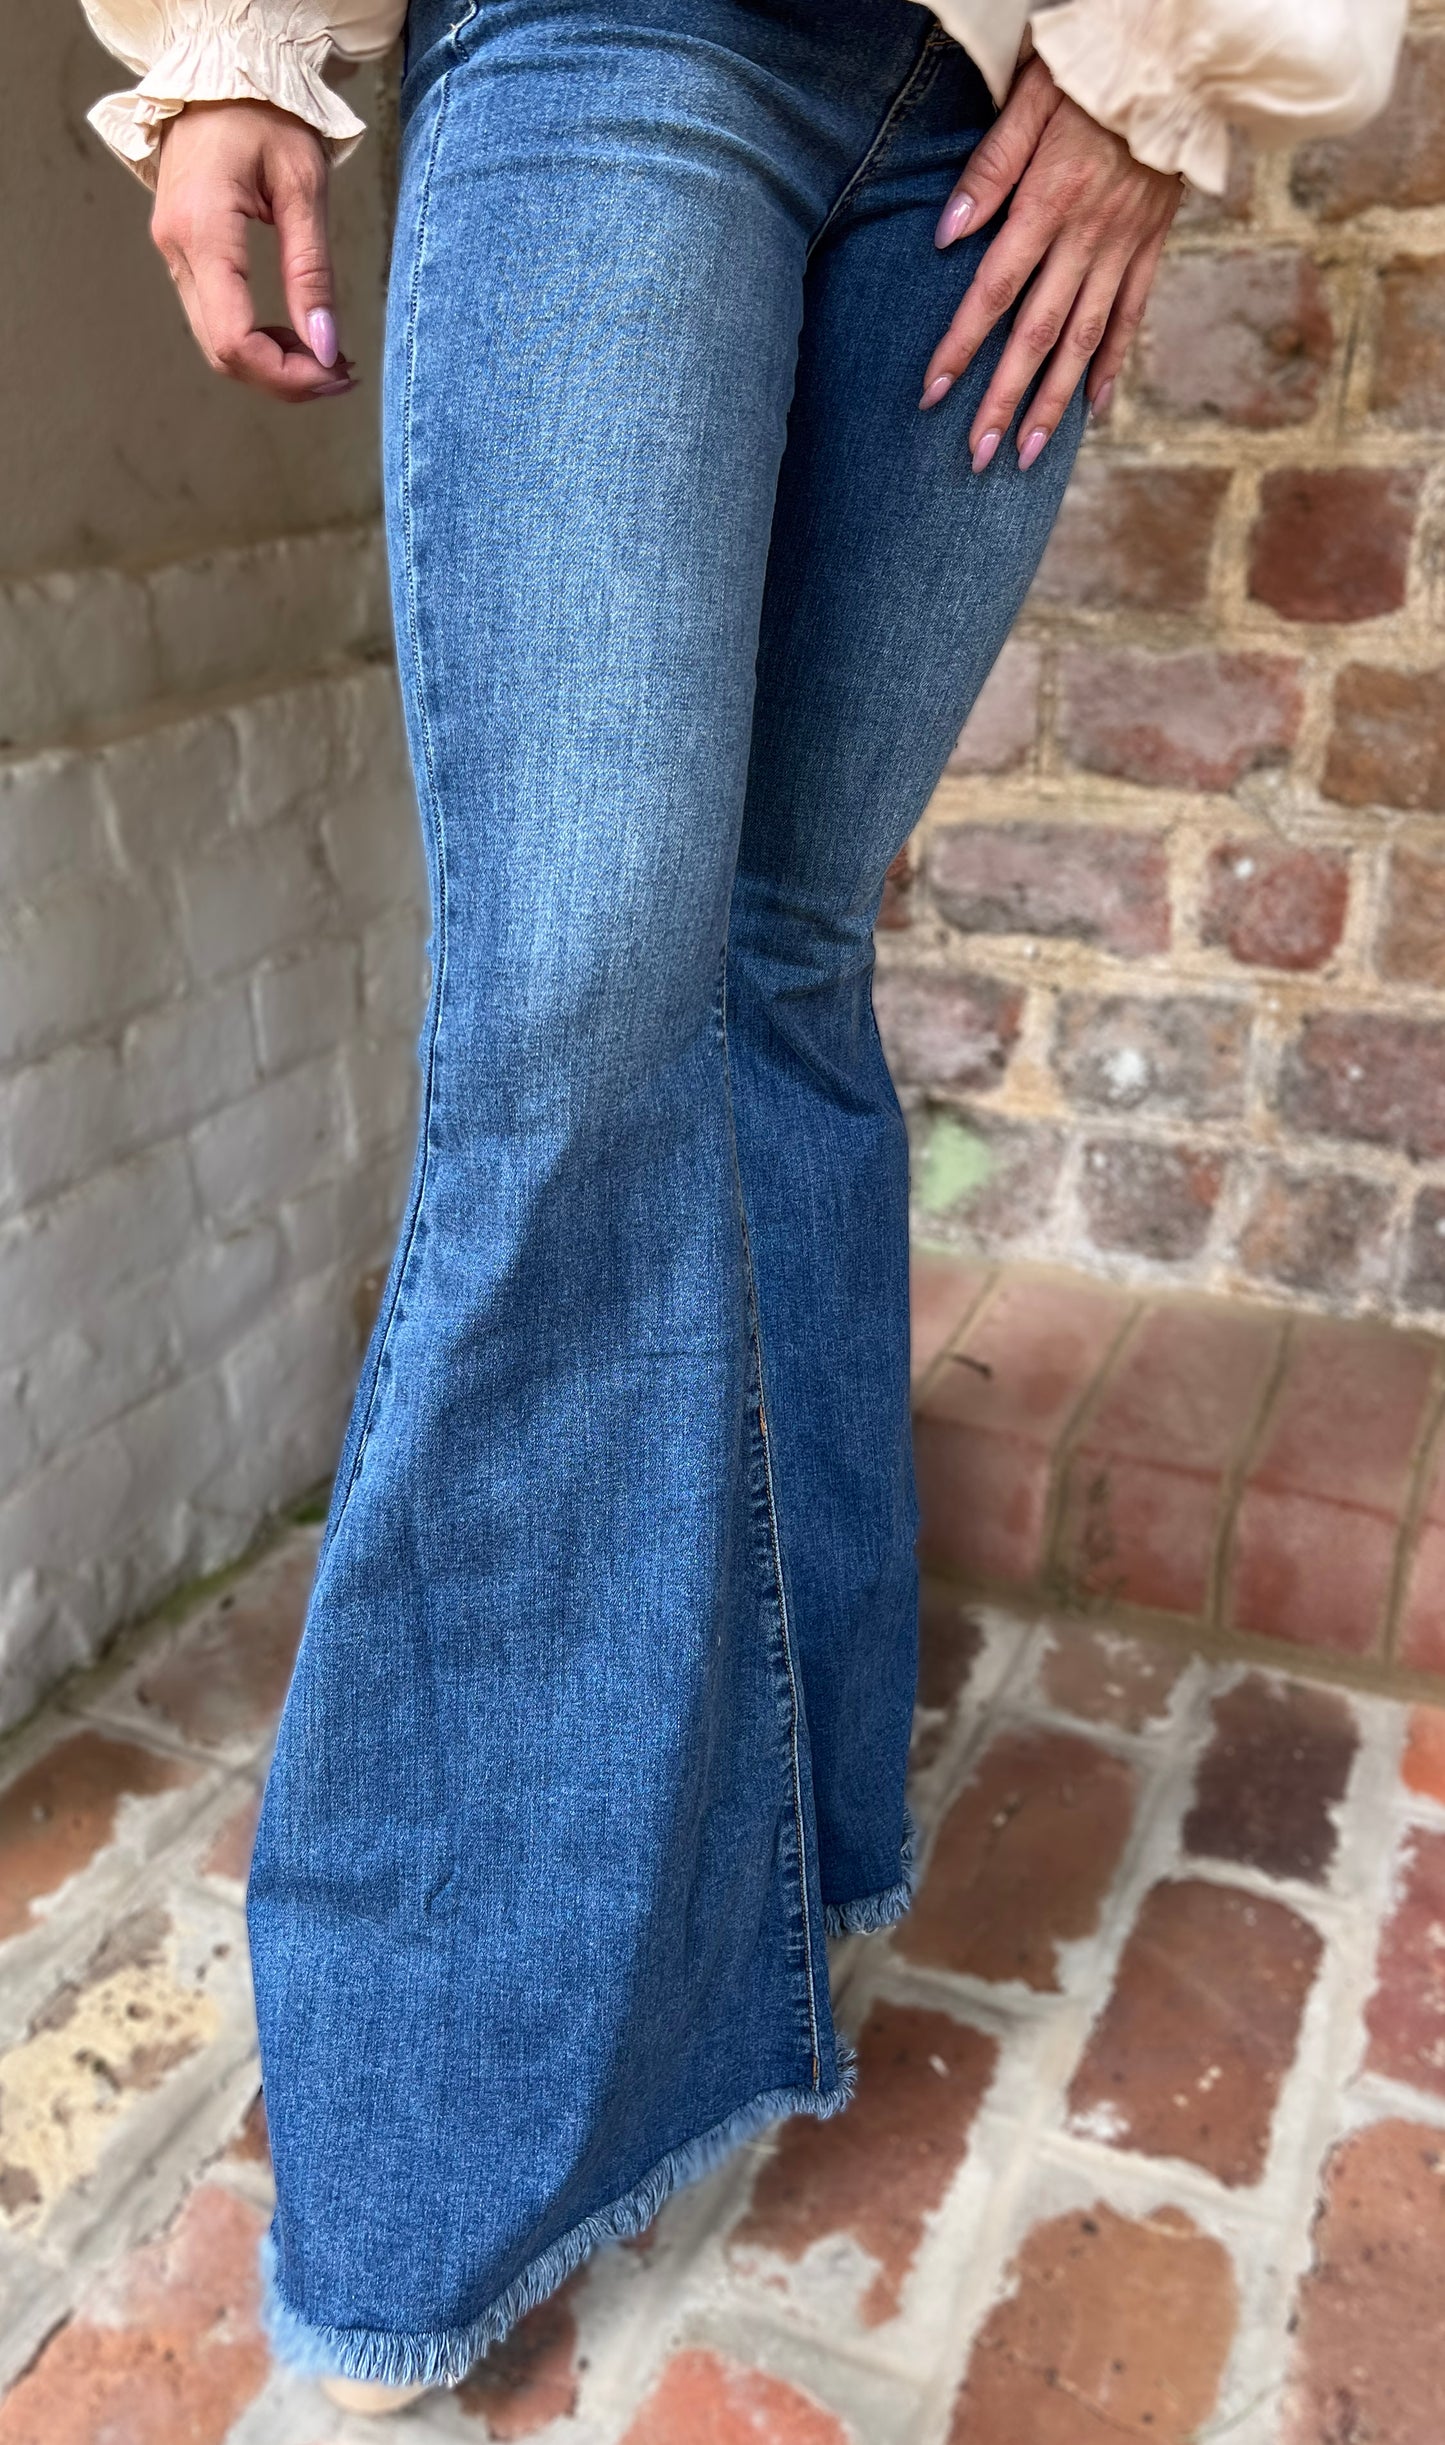 Kenzie's Super Flare Jeans